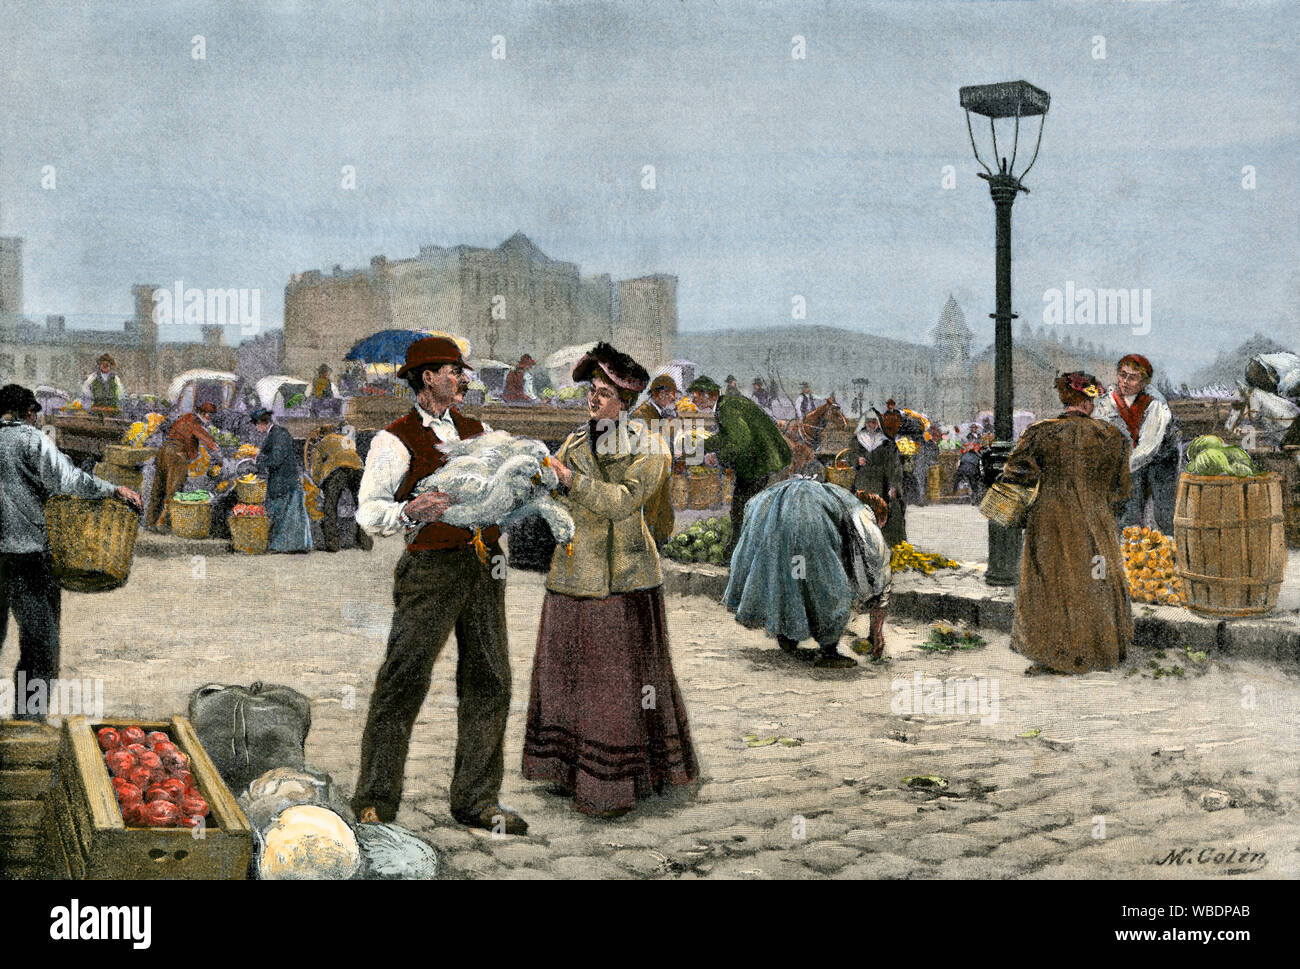 Shoppers and farmers at Gansevoort Market in New York City, 1890s. Hand-colored halftone Stock Photo